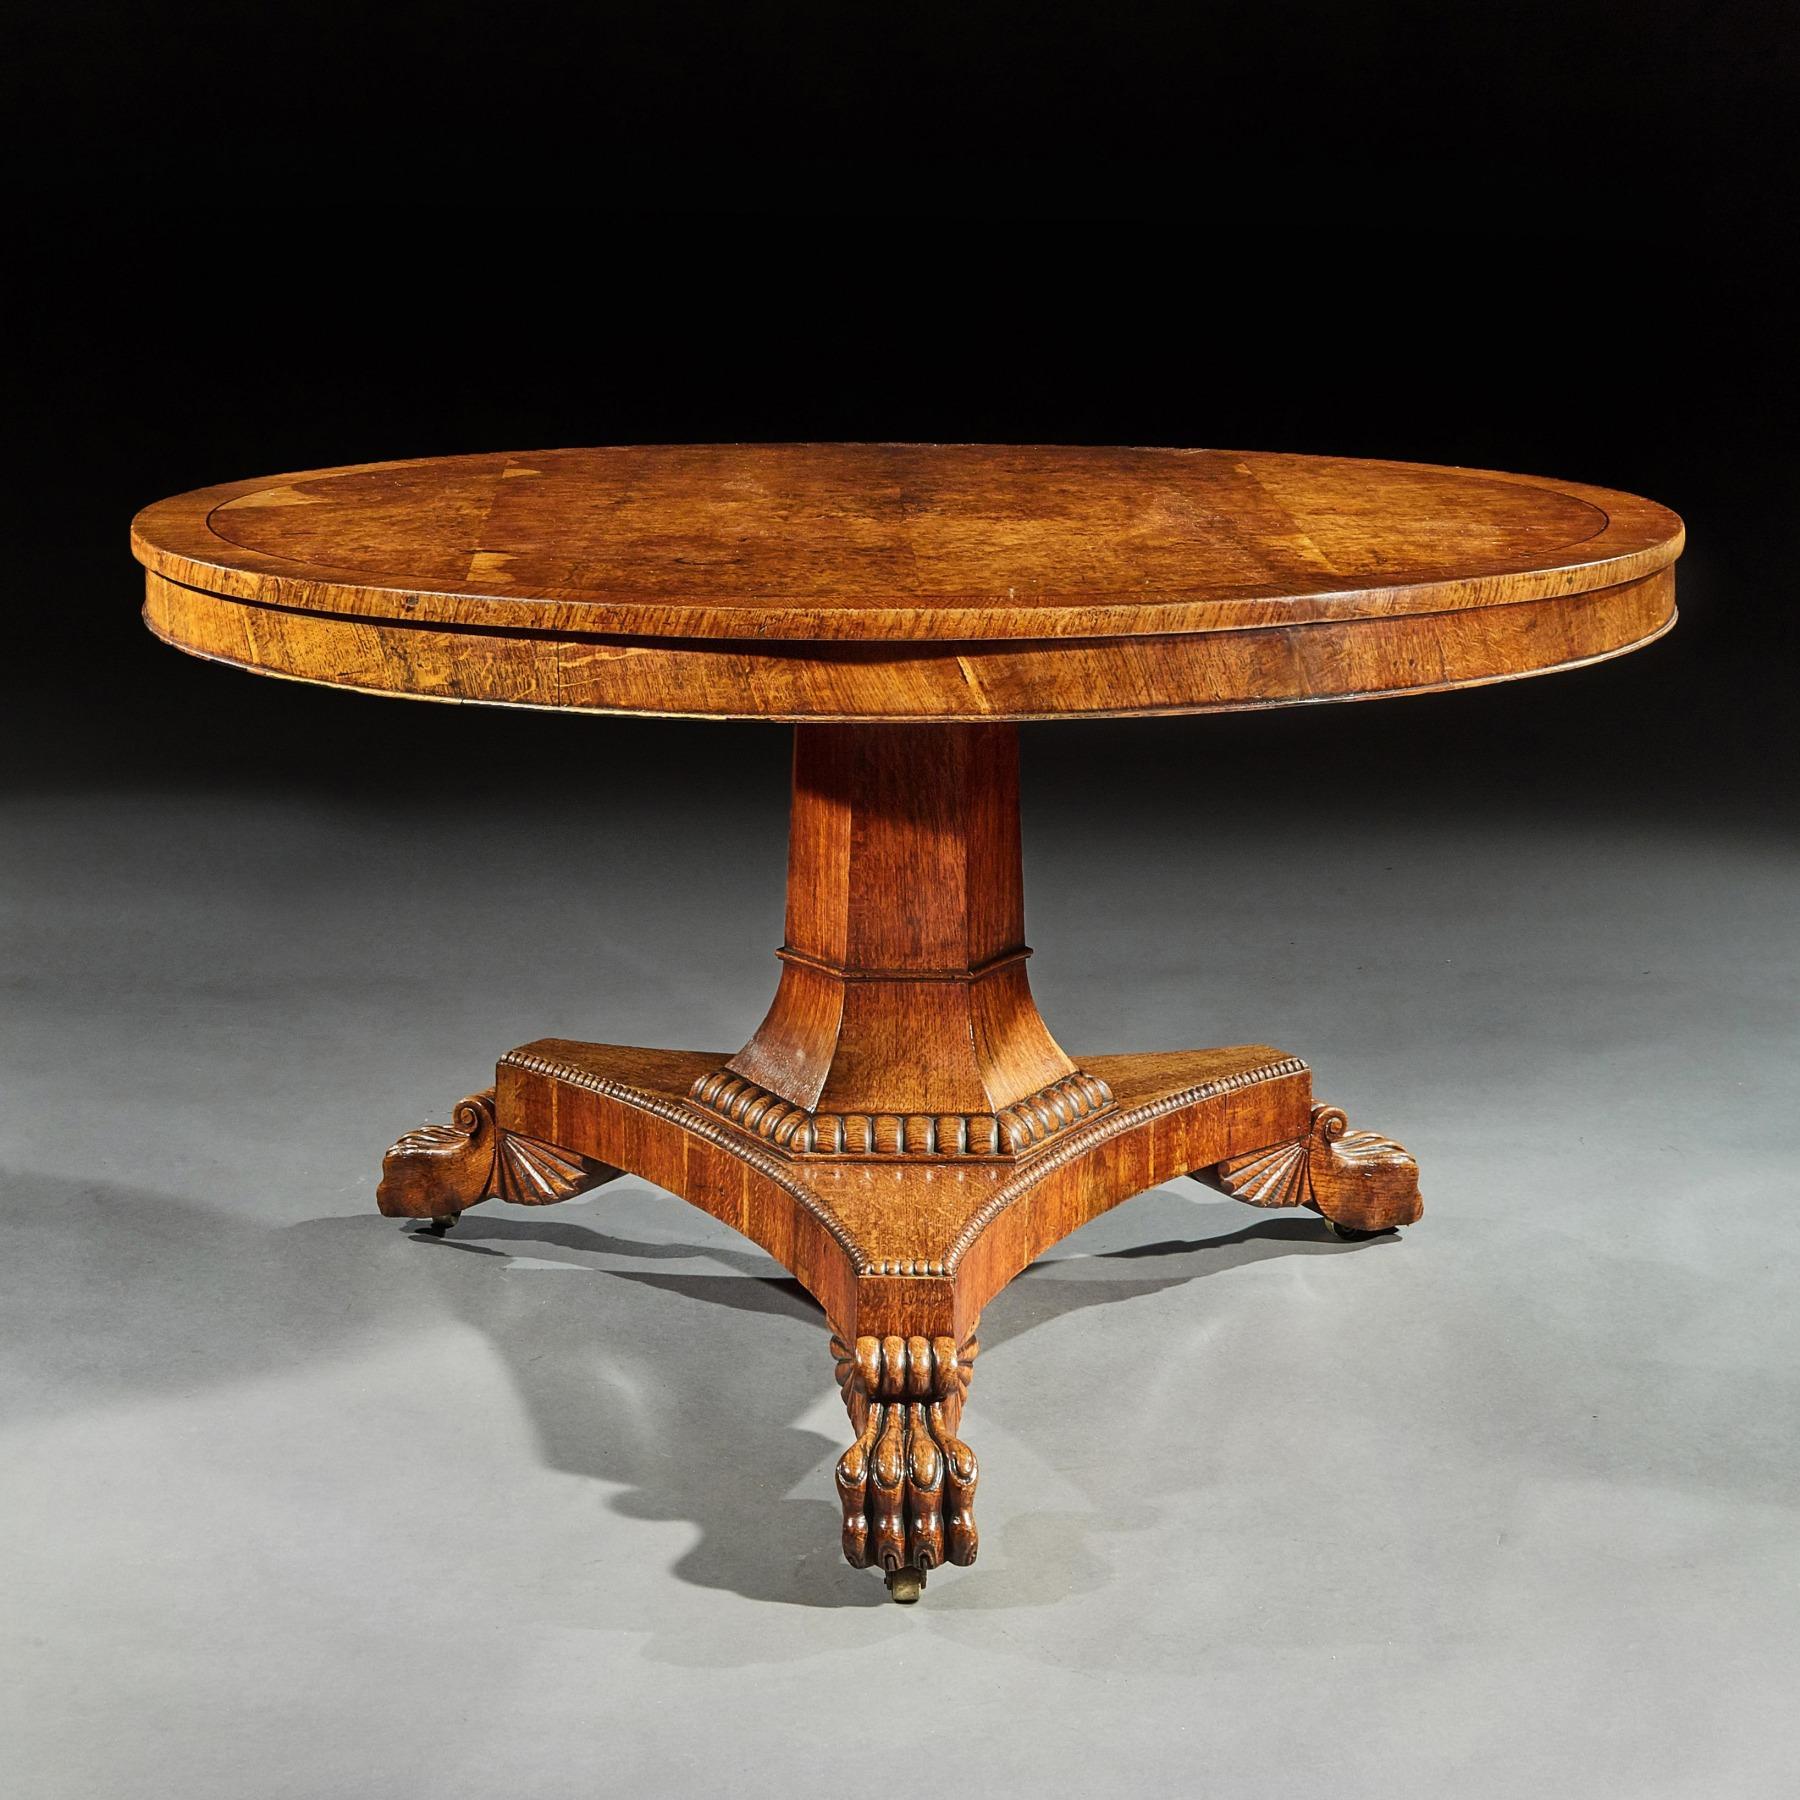 A wonderful Regency burr oak tilt top dining / centre table of excellent natural color and wax patina.

English circa 1825

Constructed during the reign of George IV and inspired by Greco Roman design this superb table has extremely well chosen